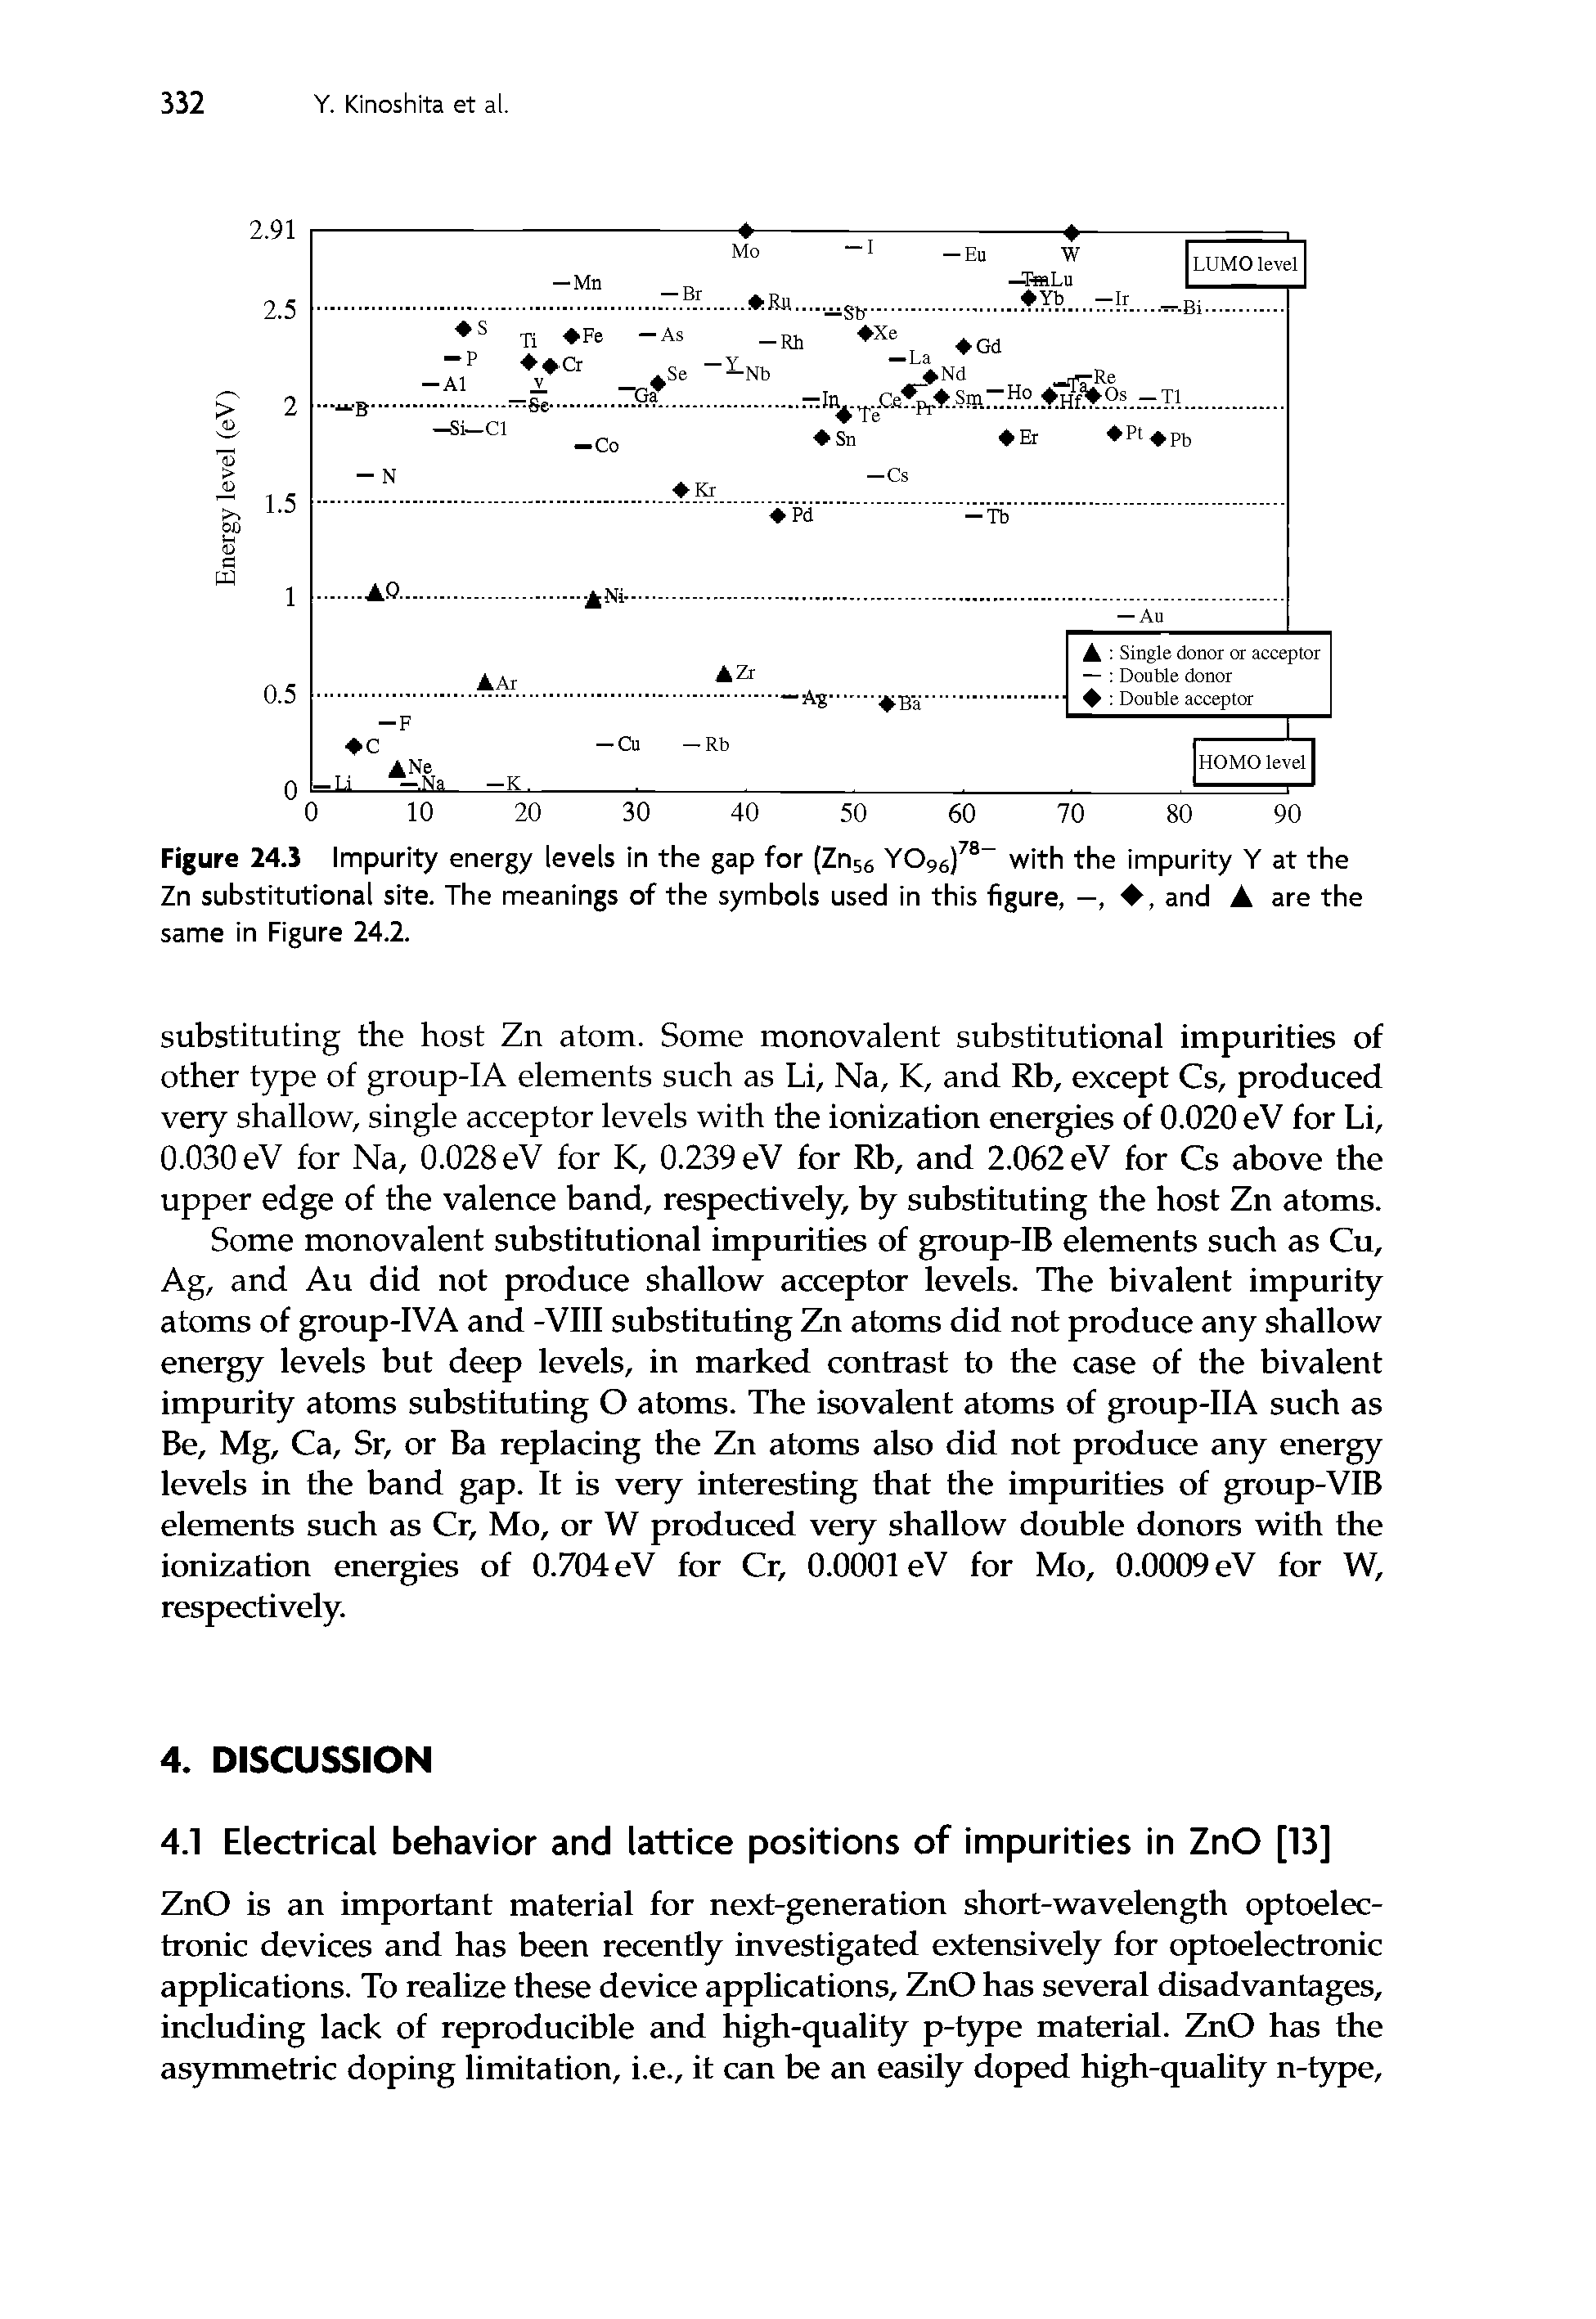 Figure 24.3 Impurity energy levels in the gap for (Zn56 Y096)78 with the impurity Y at the Zn substitutional site. The meanings of the symbols used in this figure, —, , and are the same in Figure 24.2.